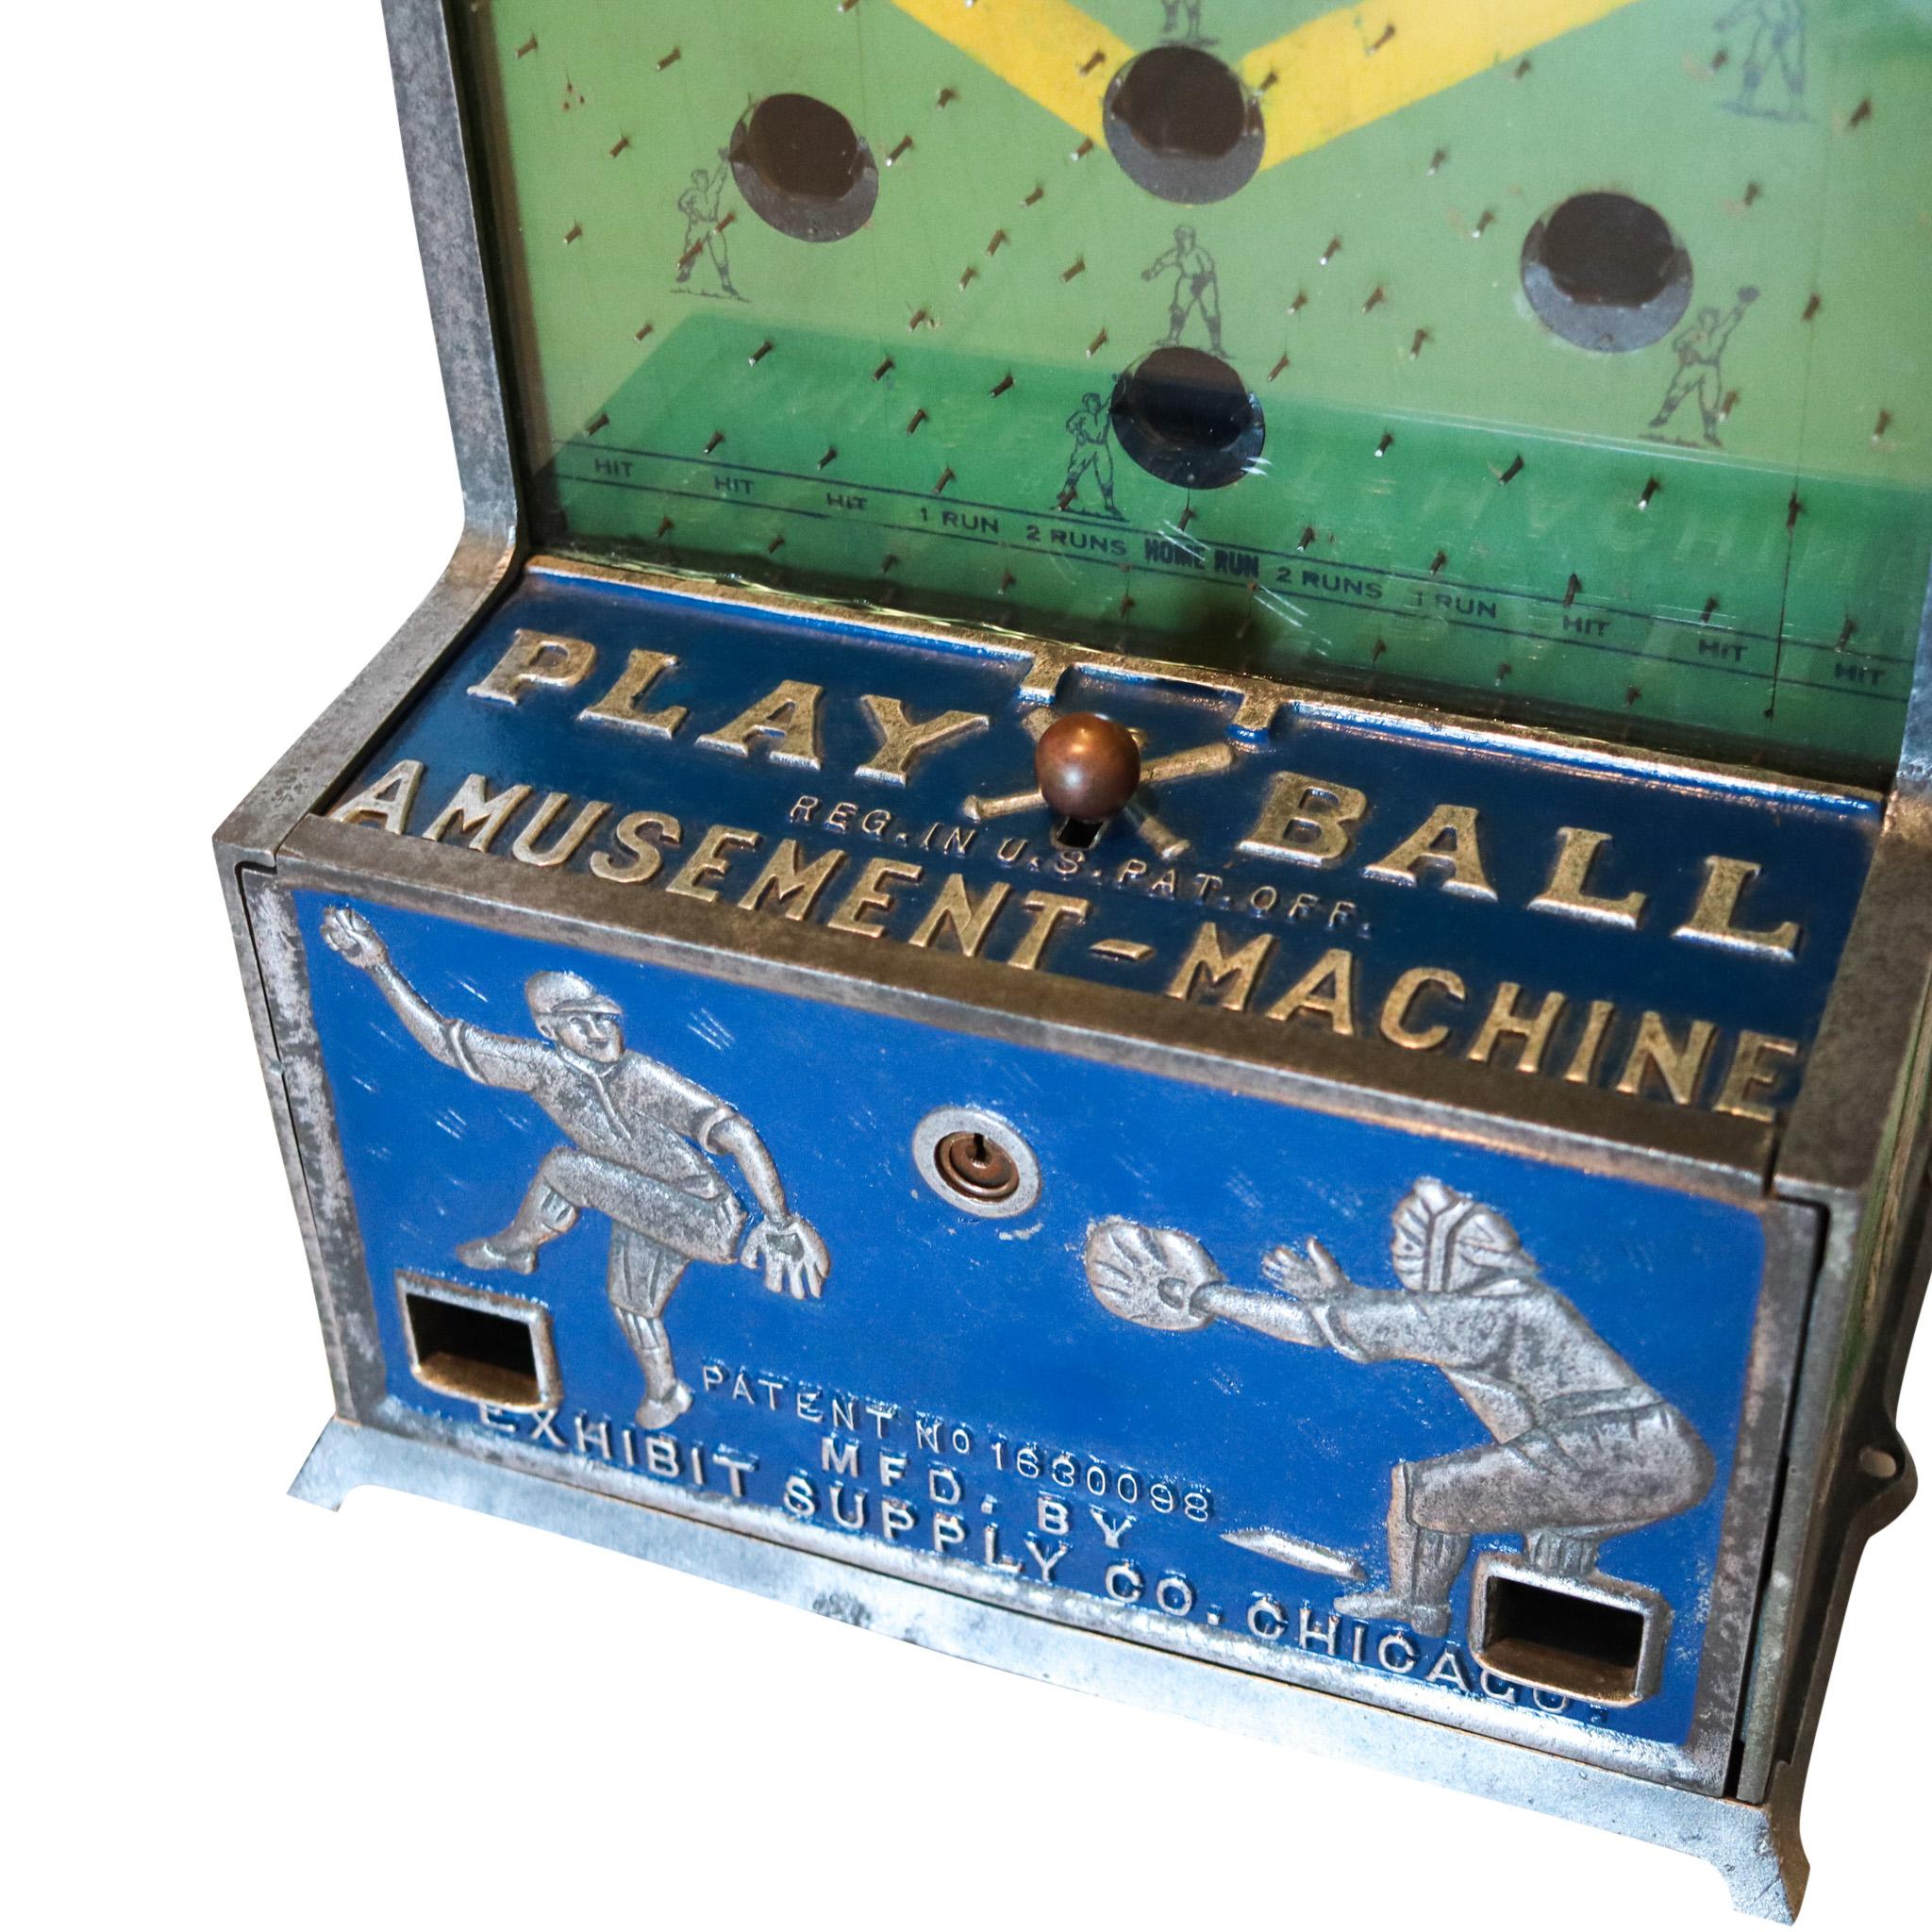 Art Deco Baseball Coin Drop Baseball Game Arcade.

An extremely rare piece of baseball amusement. Created during the art deco period in Chicago Illinois. This is a baseball coin-op game, titled 